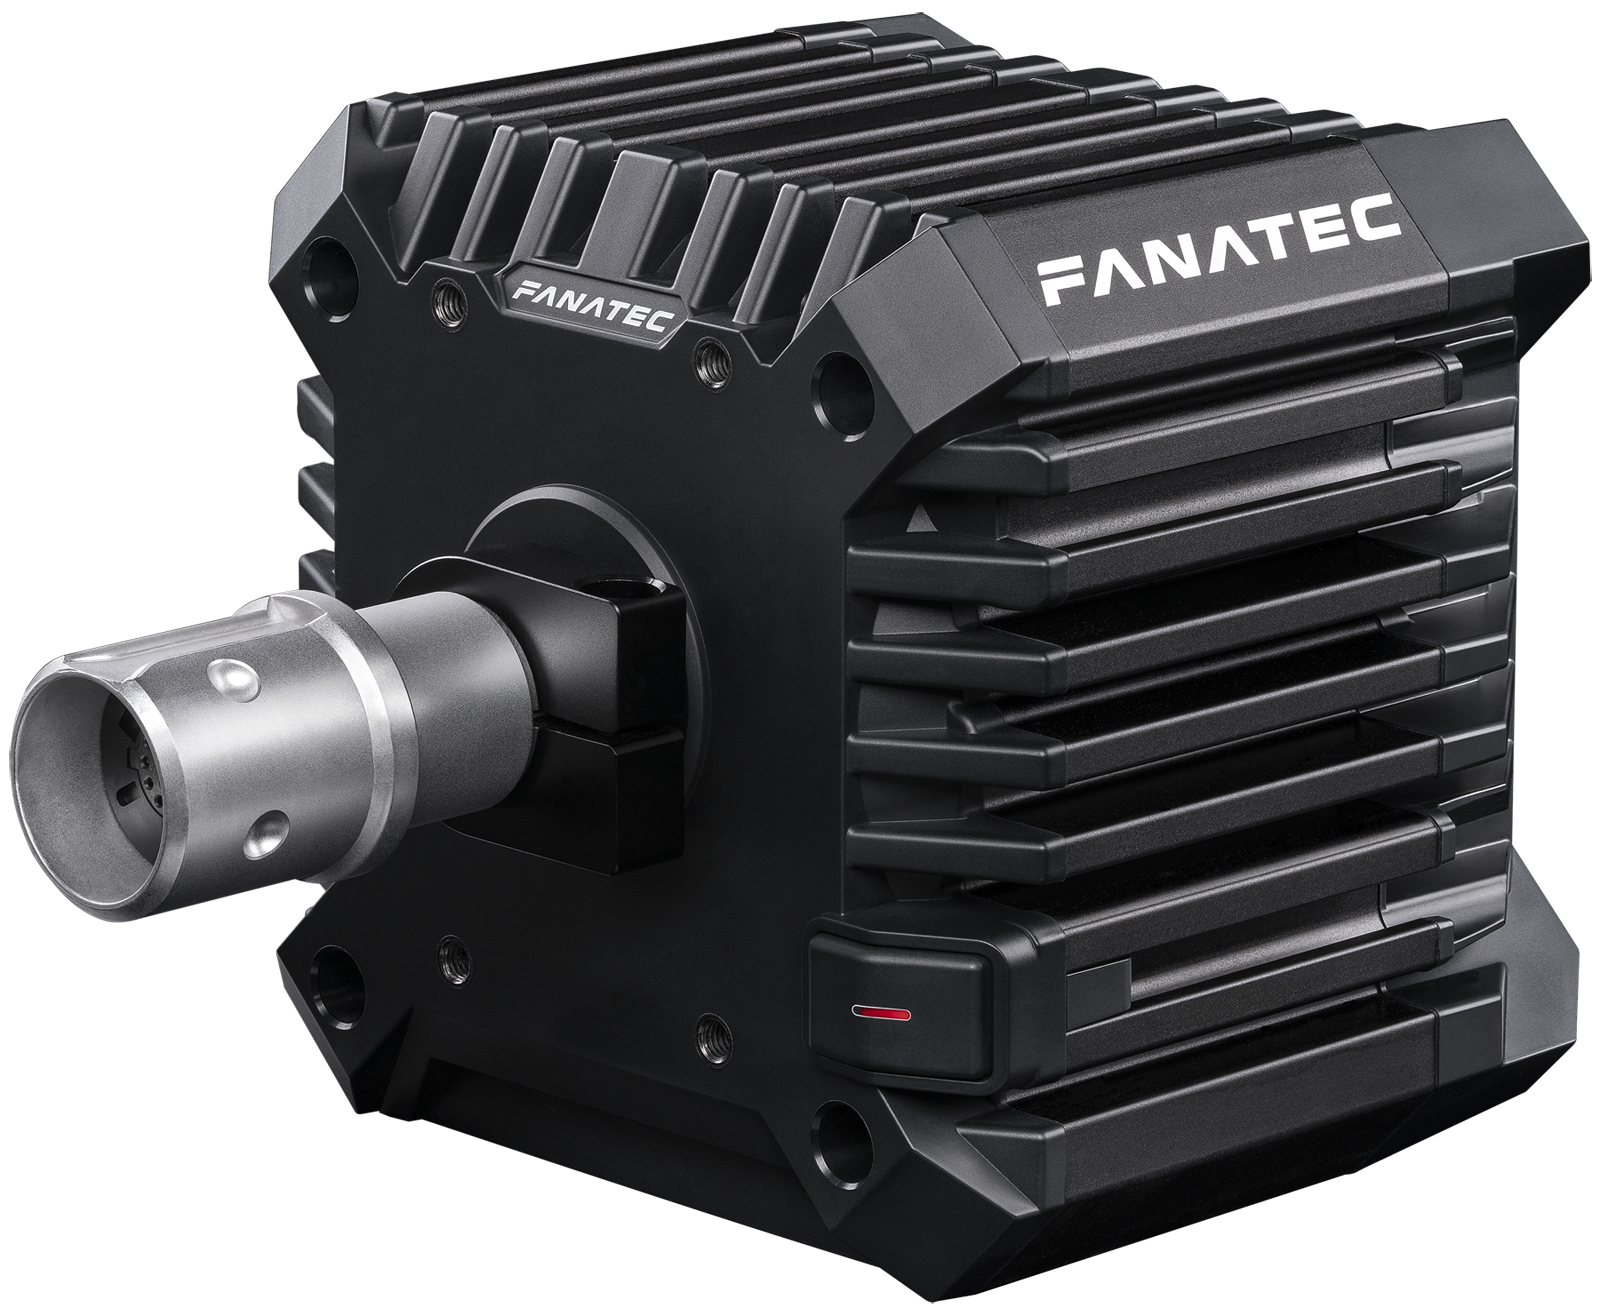 newstandardd – Just another Fanatec Sites site